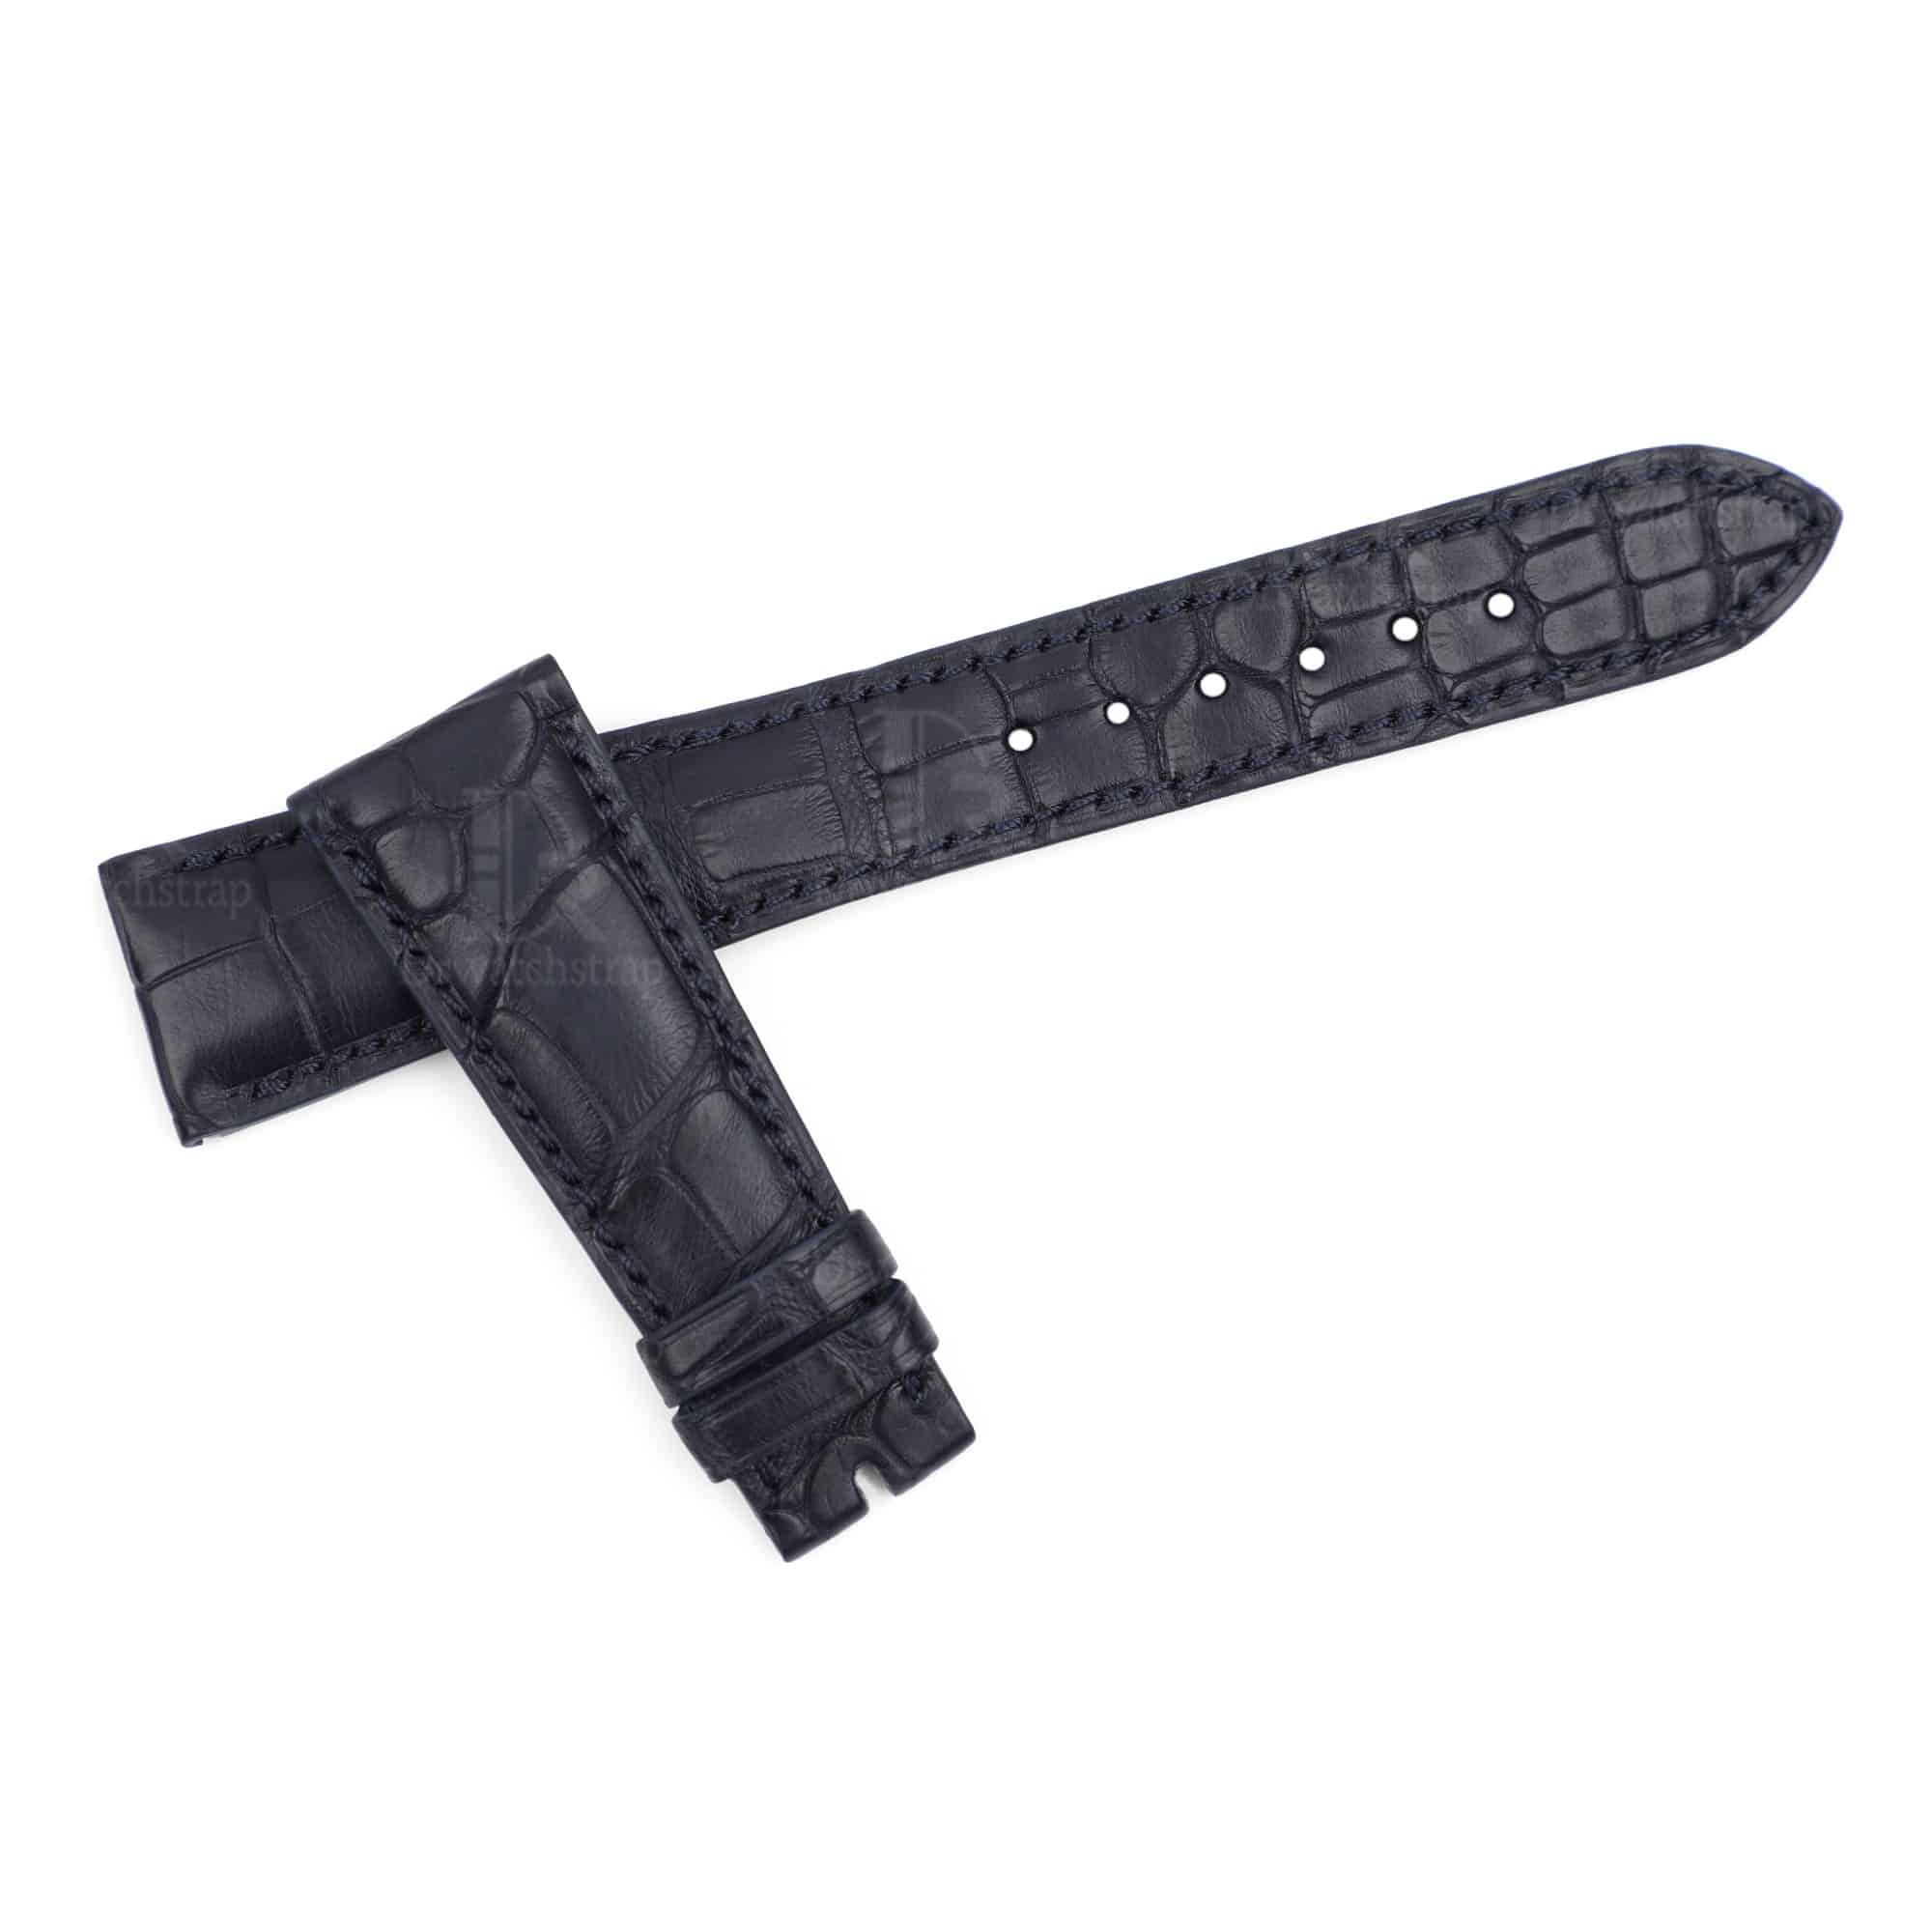 Buy replacement Patek Philippe Blue leather strap American Alligator at discount price lug size available 12mm 14mm 16mm 18mm 19mm 20mm 21mm 22mm 23mm 24mm